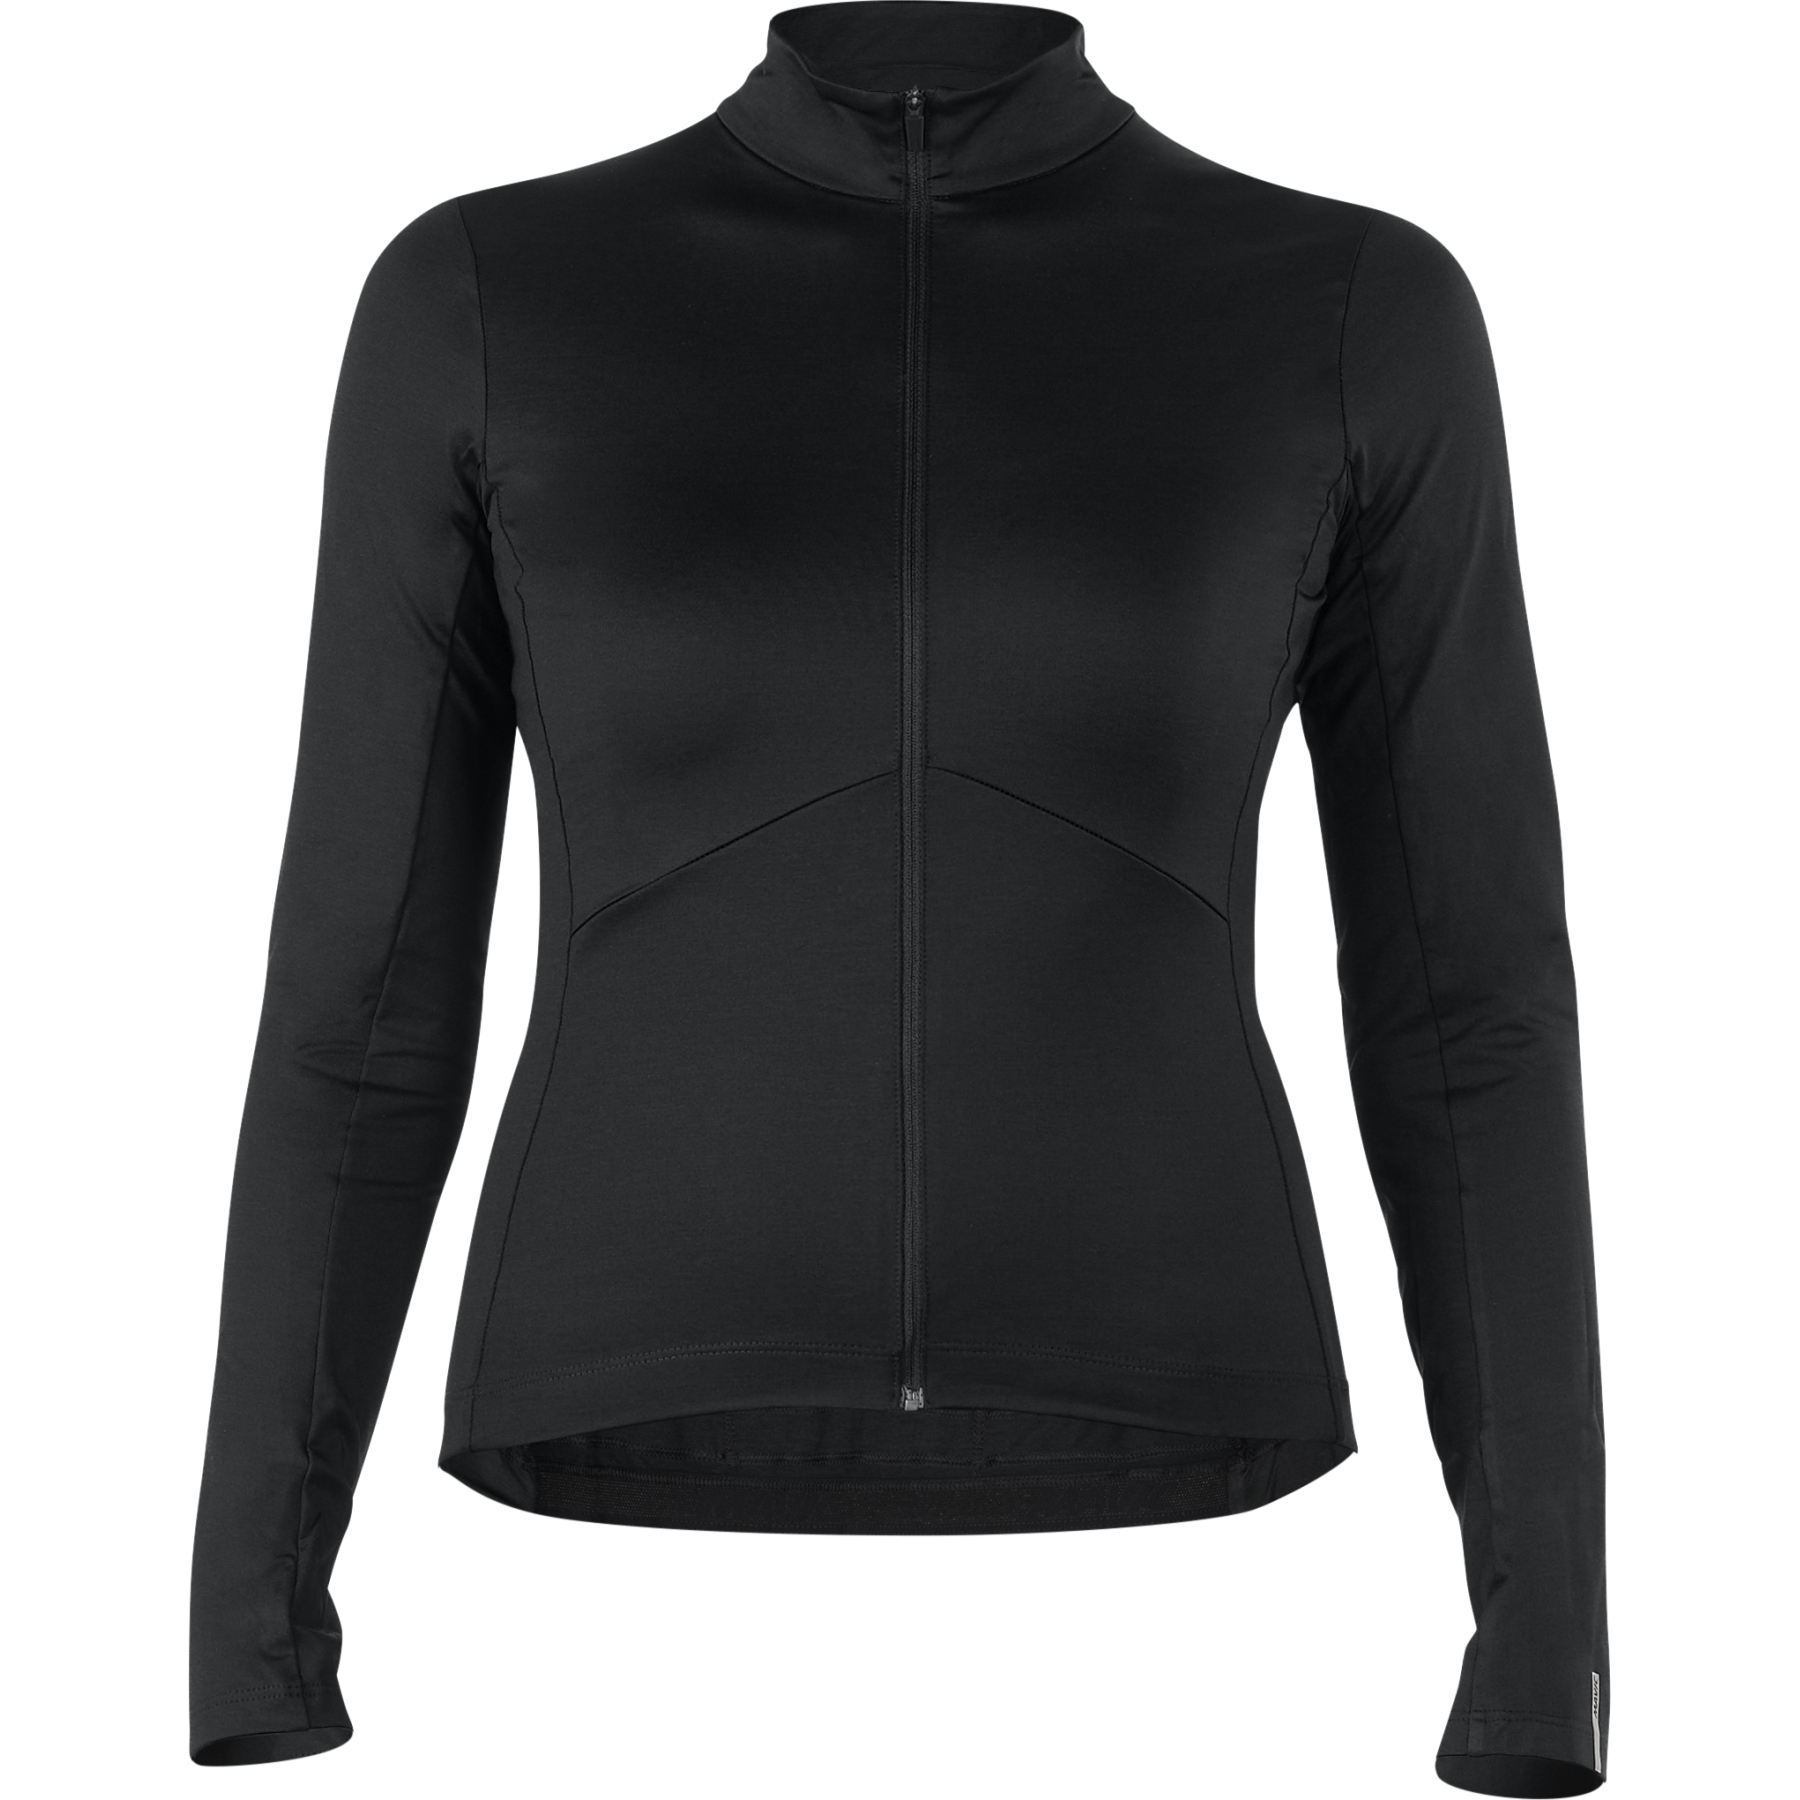 Image of Mavic Sequence Thermo Long Sleeves Women's Jersey - black